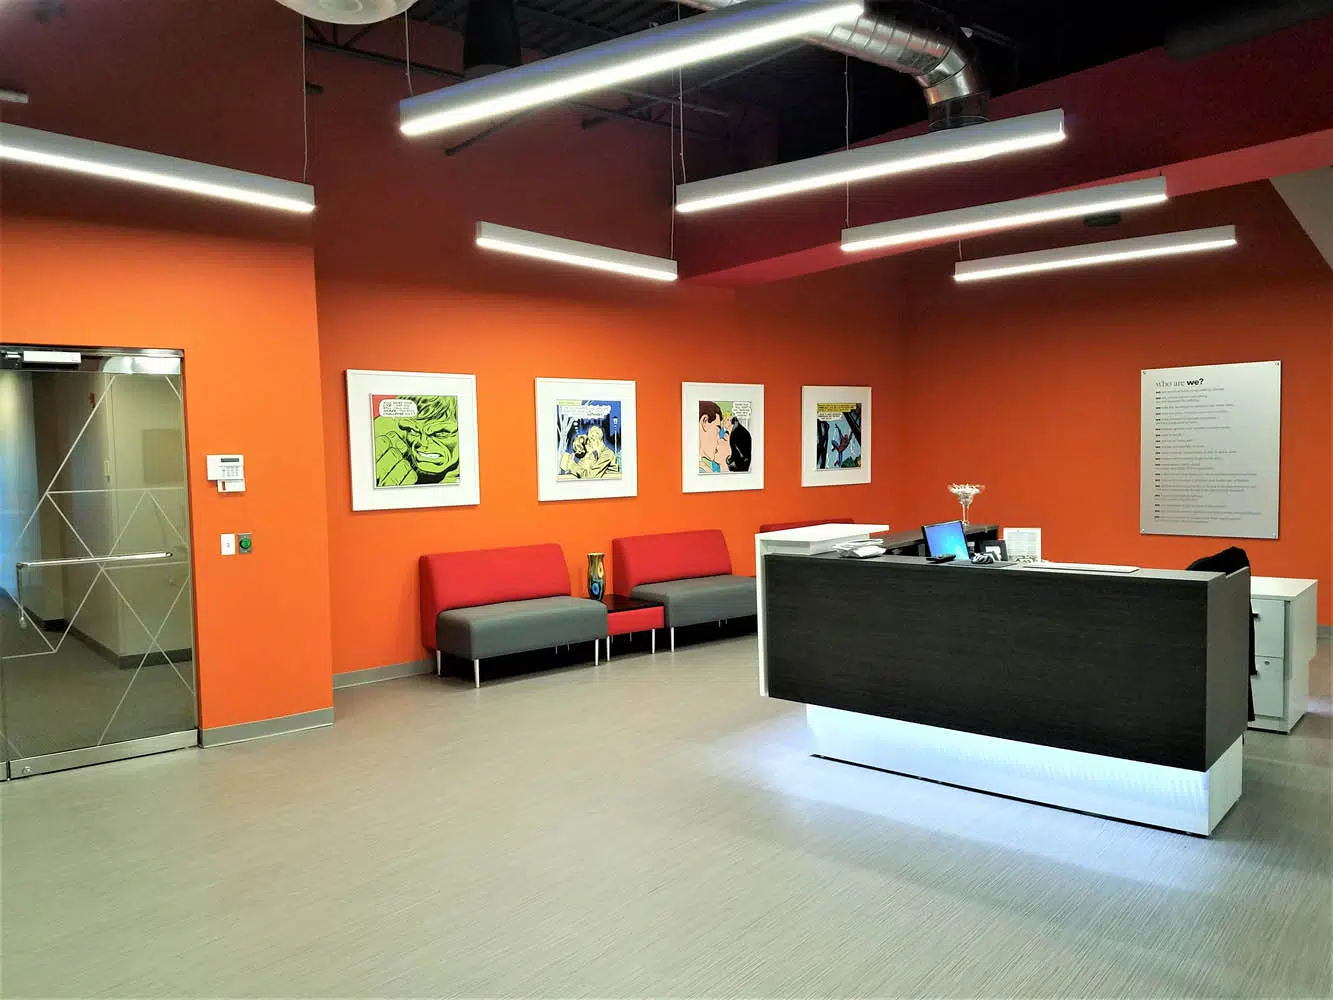 Modern office entryway that emphasizes brand colors and character